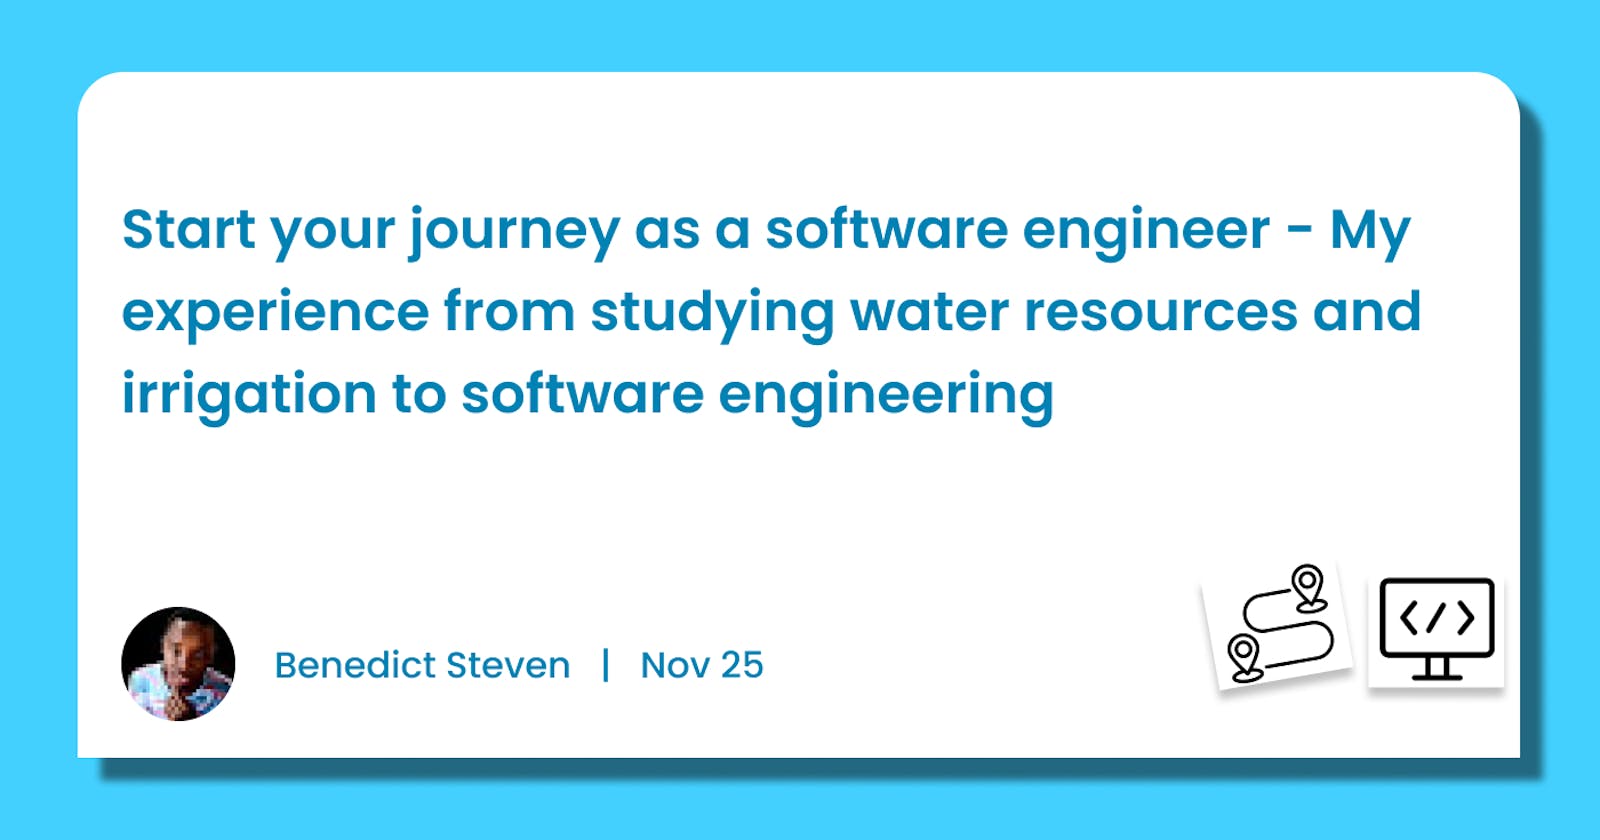 Start your journey as a software engineer - My experience from studying water resources and irrigation to software engineering